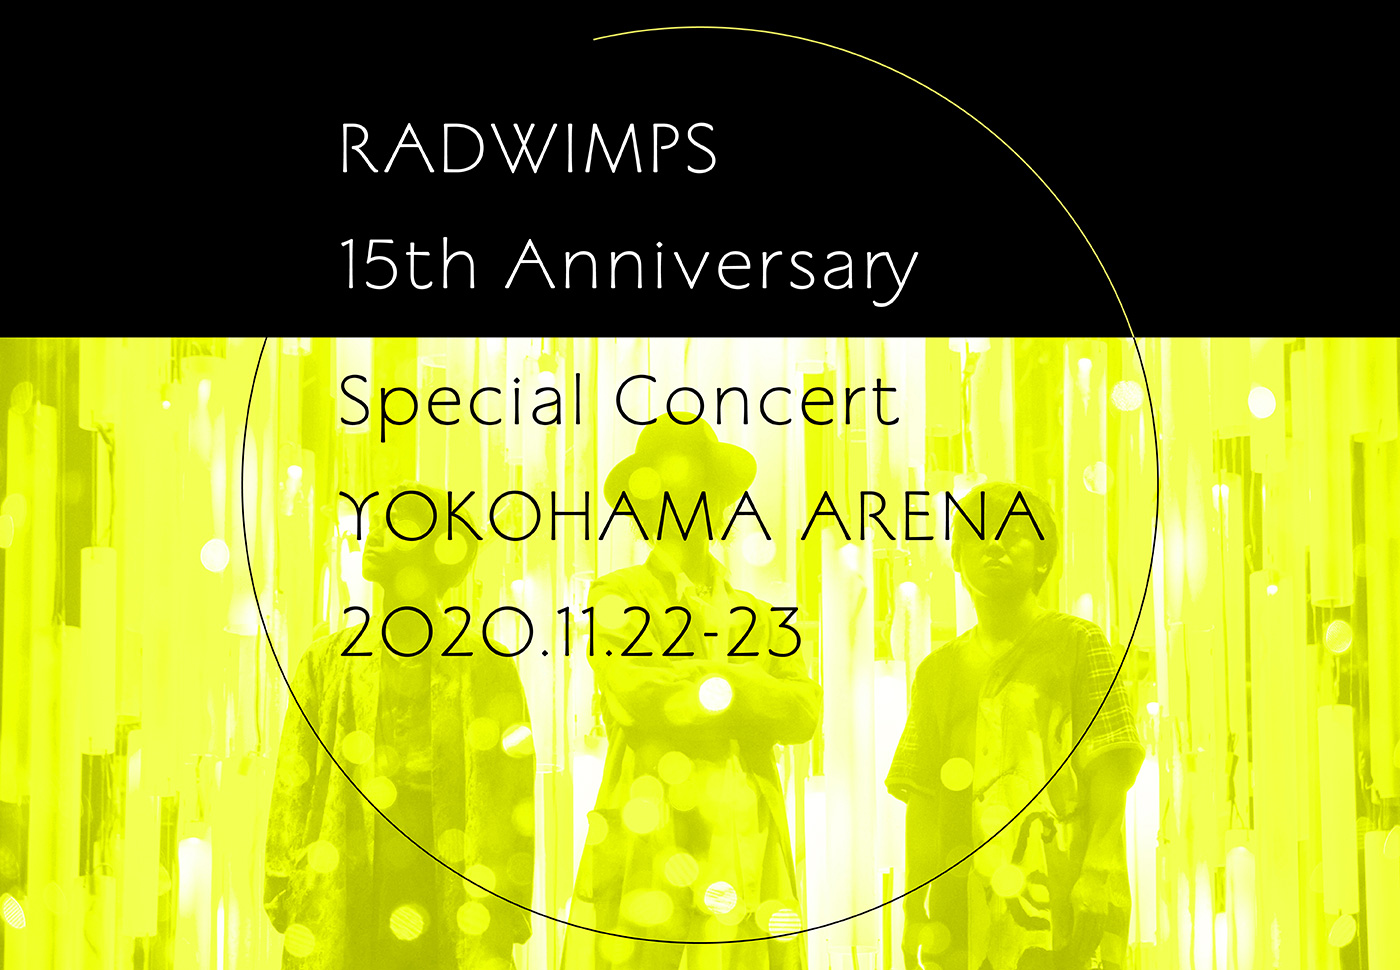 Radwimps 15th Anniversary Special Concert 2020 11 22 23